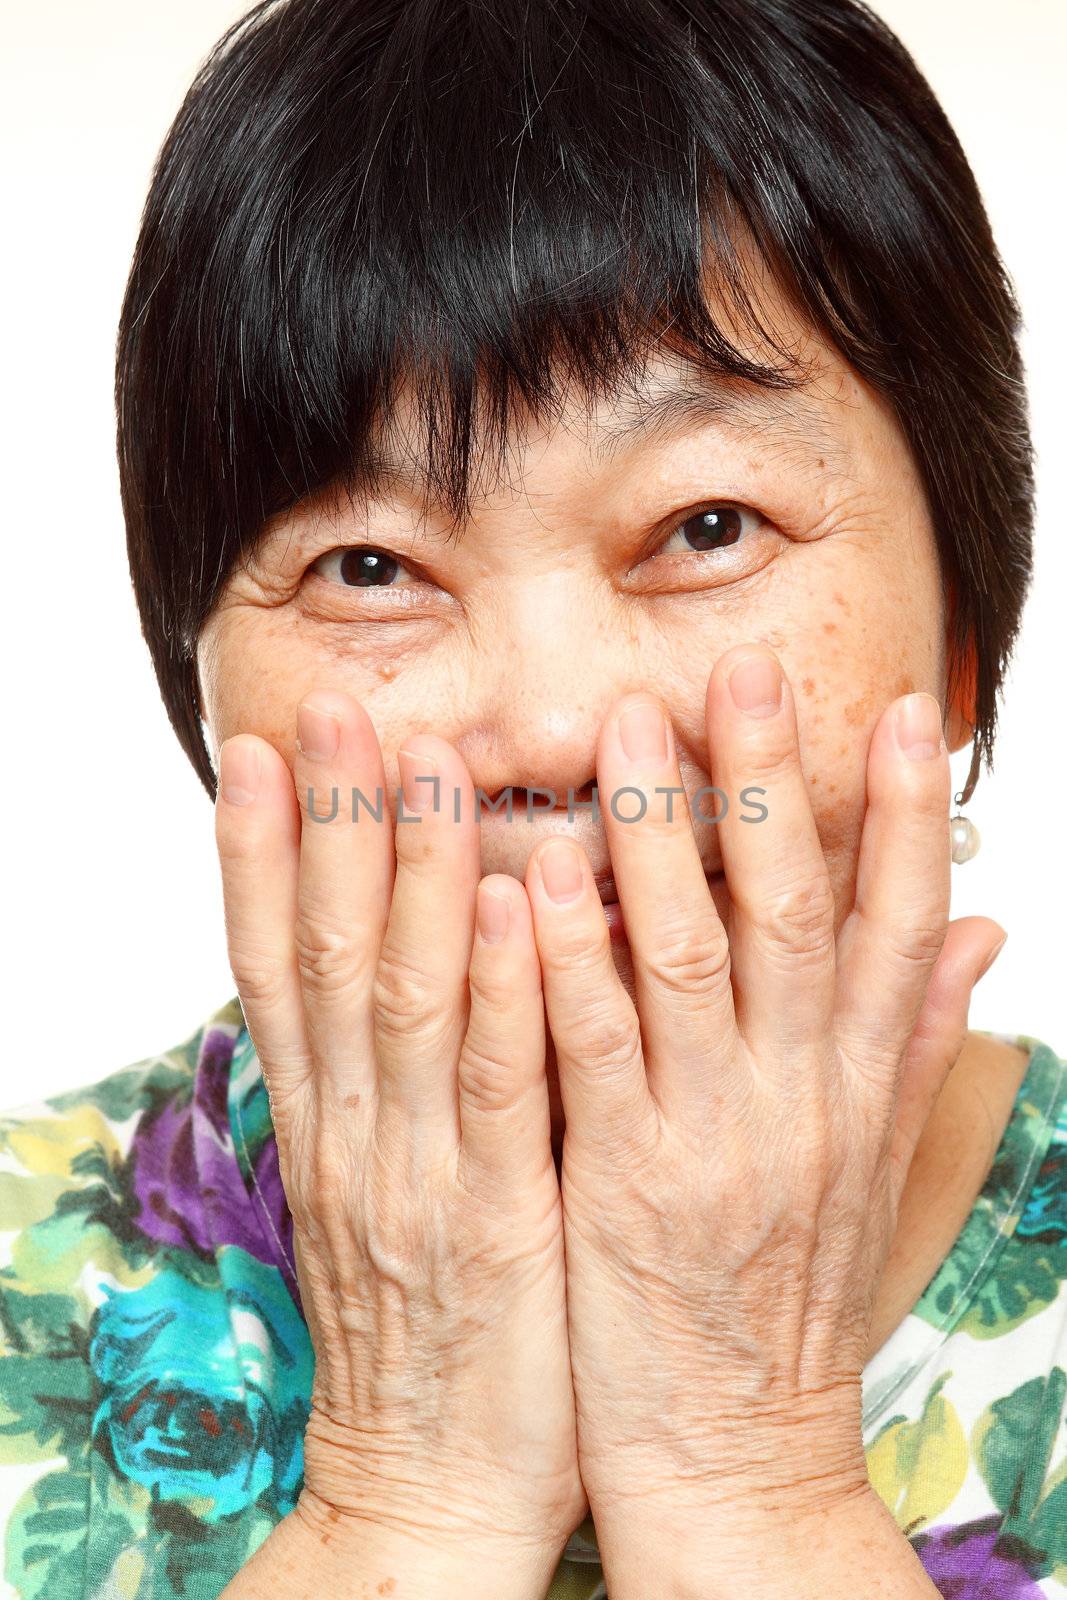 asian woman use hand cover her mouth